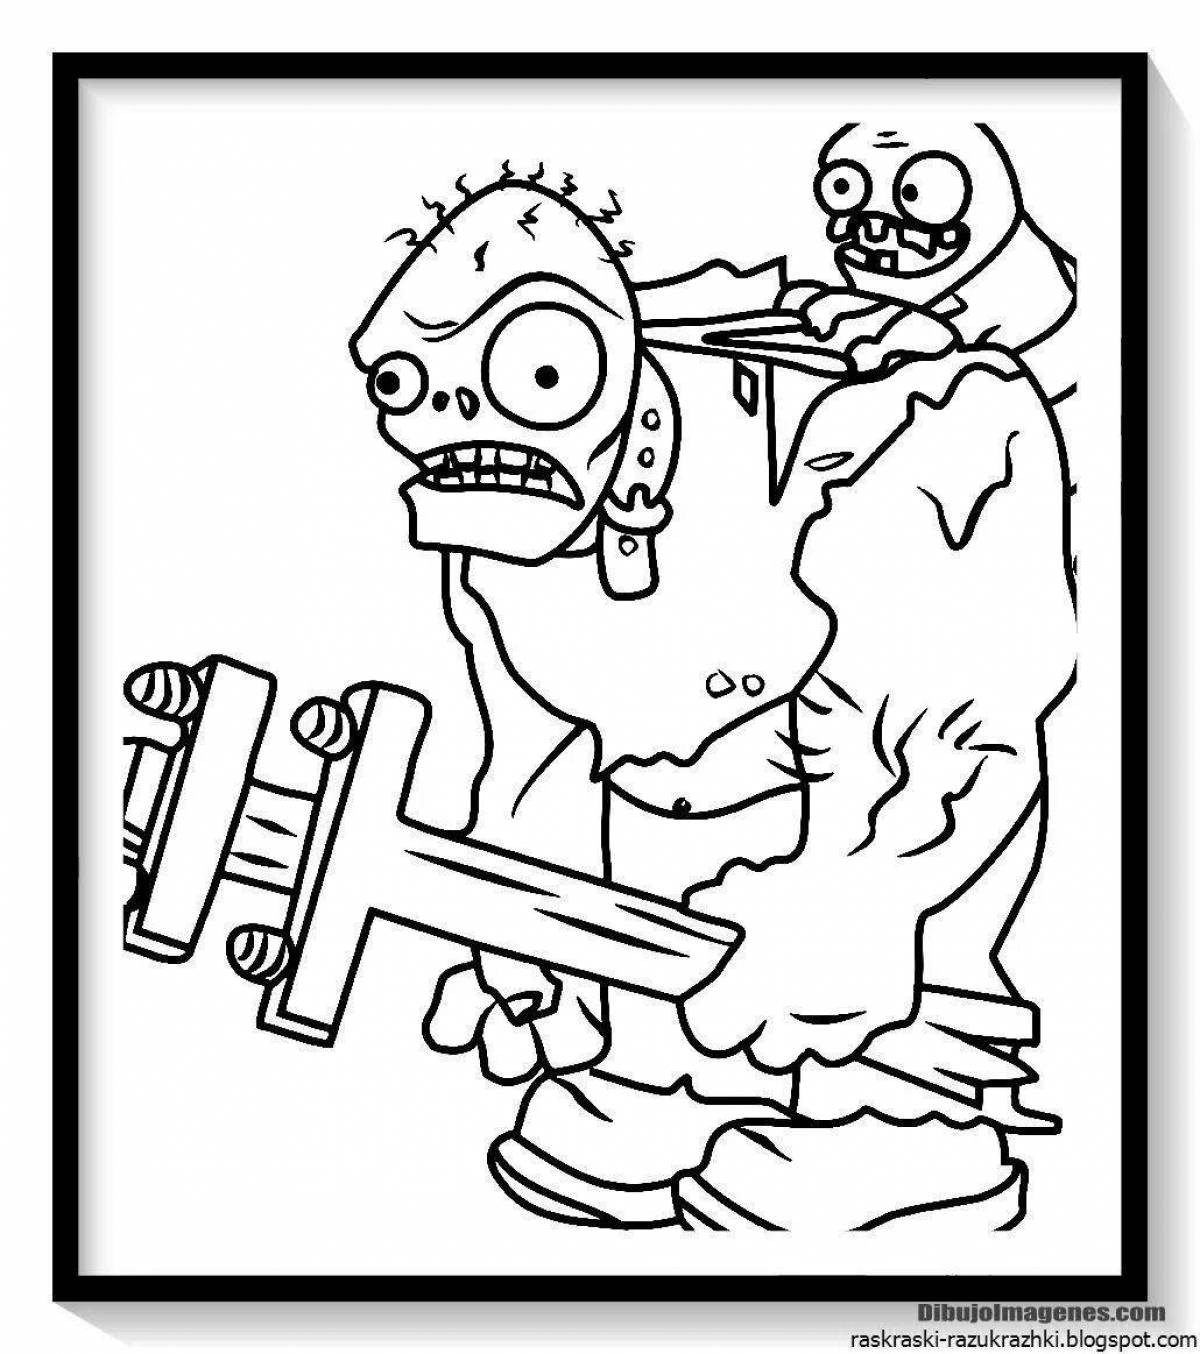 Horrible zombie coloring page